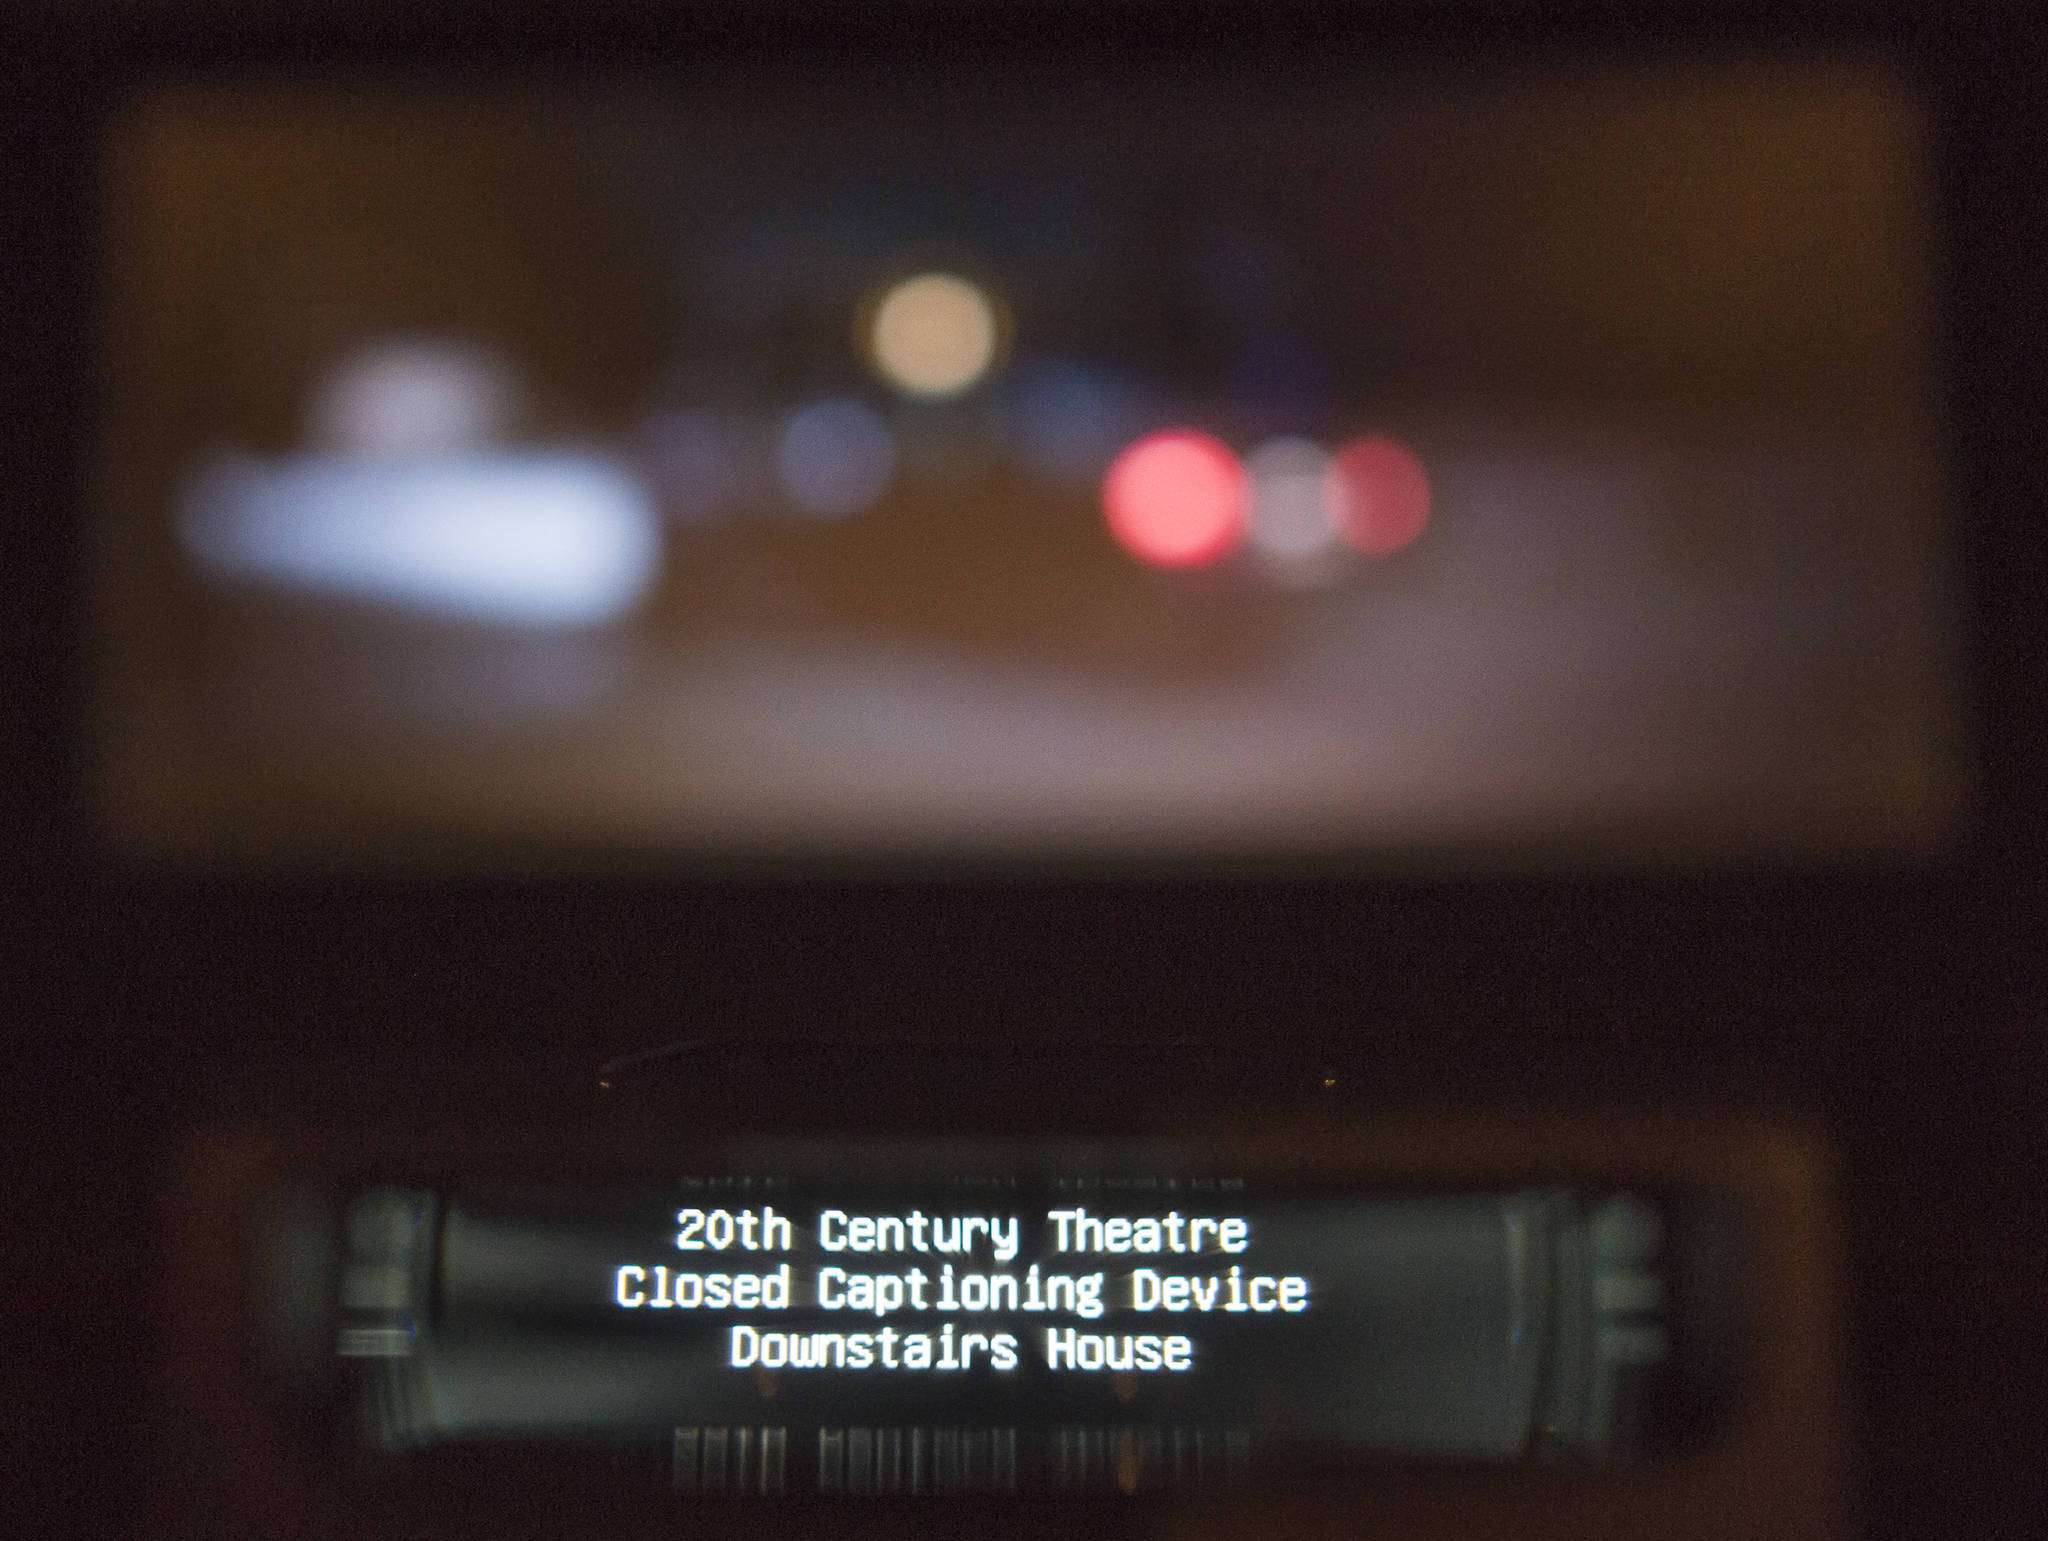 A new closed captioning is demonstrated at the 20th Century Theatre in downtown Juneau on Monday, July 16, 2018. Both closed captioning and assistive listening systems are available both downtown and their Glacier Cinemas in the Mendenhall Valley. (Michael Penn | Juneau Empire)